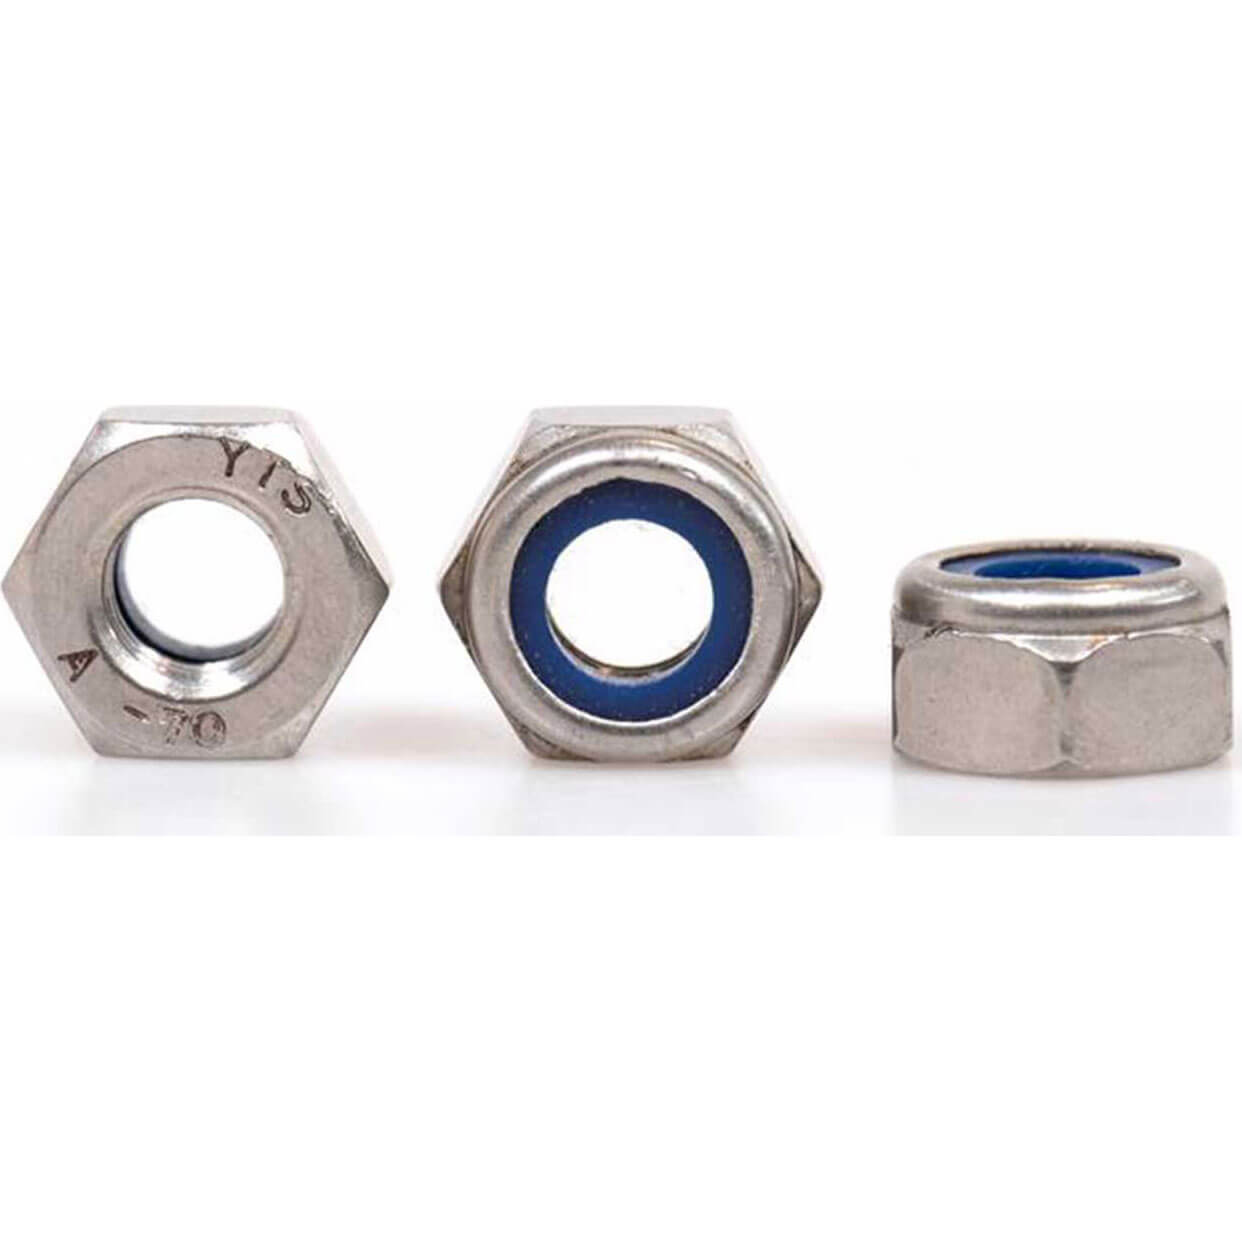 Image of Sirius A4 316 Stainless Steel Nyloc Nuts M6